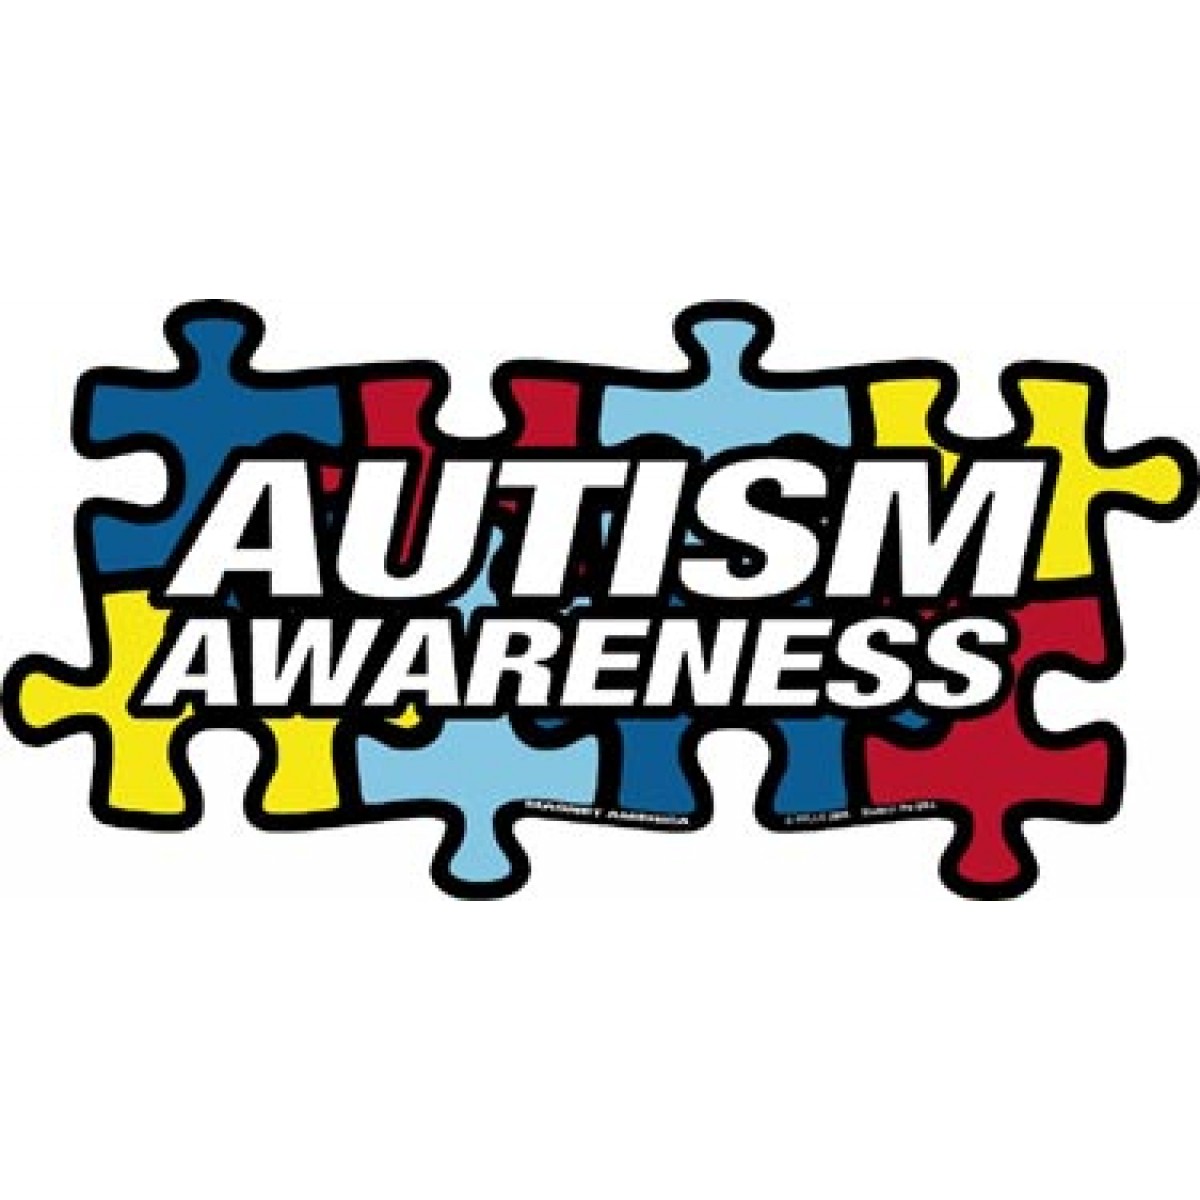 We are supporting autism awareness / acceptance week which starts today.